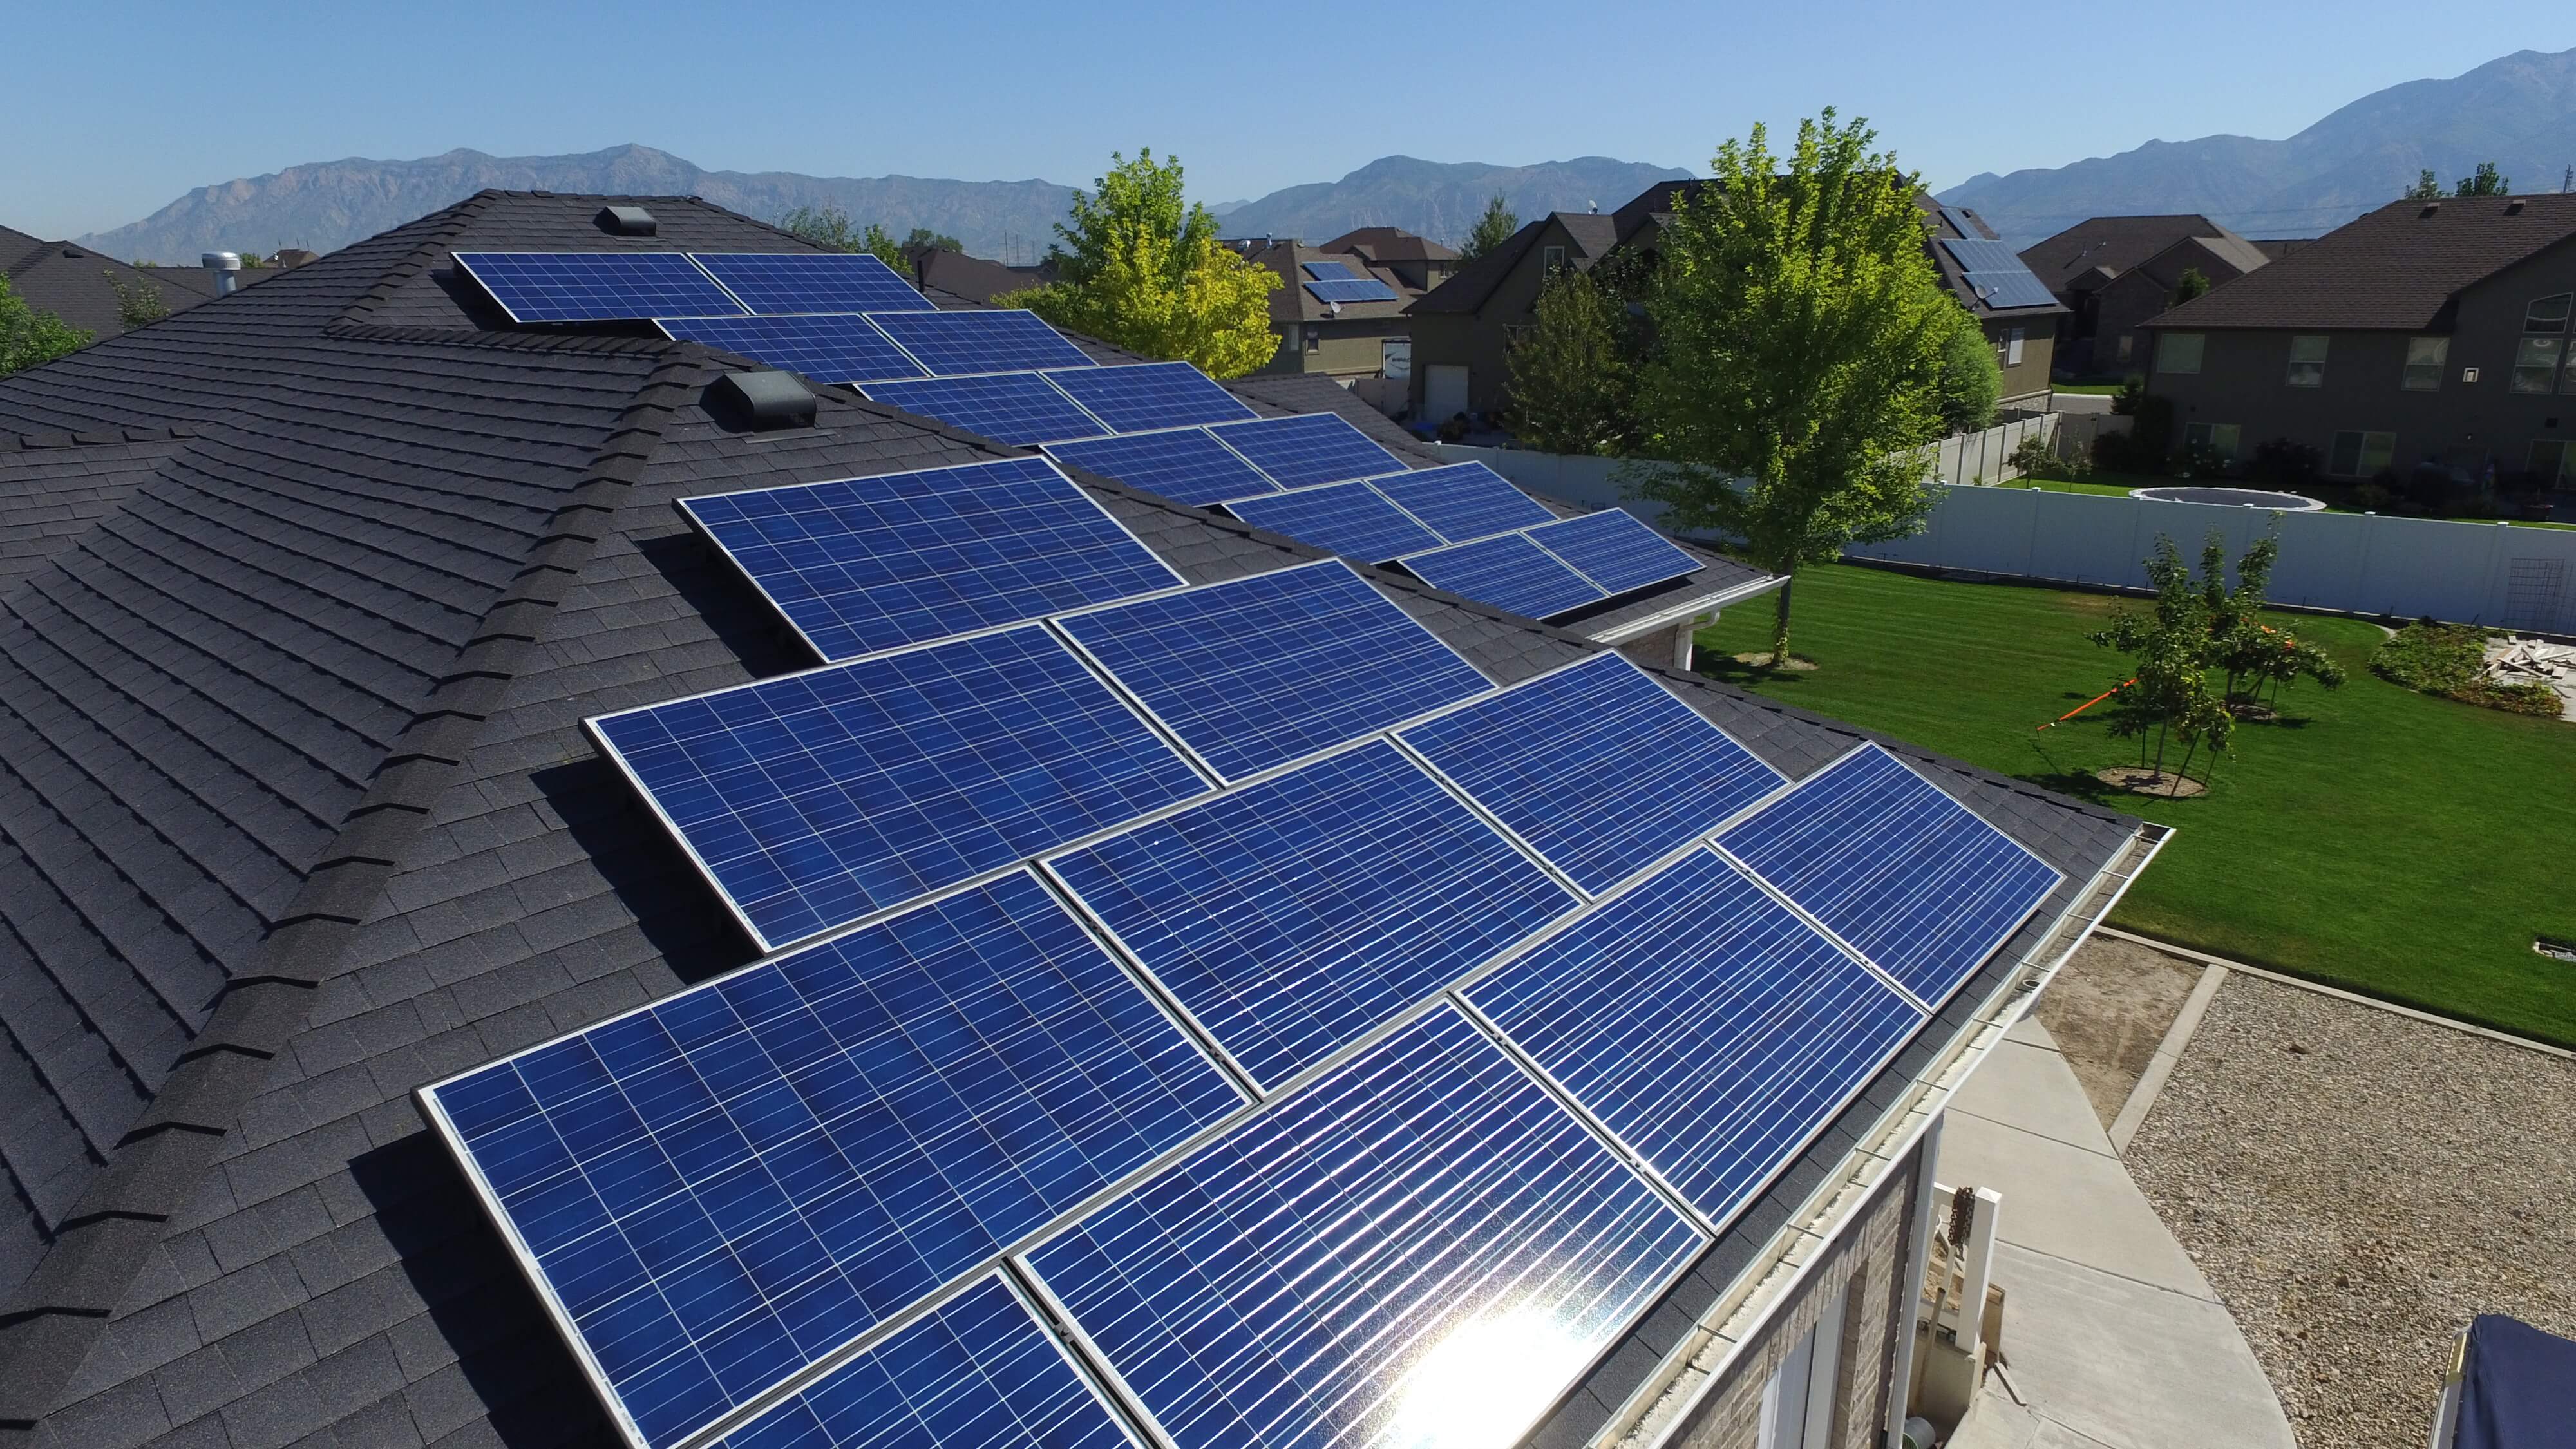 Colorado Solar Energy Systems Eligible for Tax Exemptions